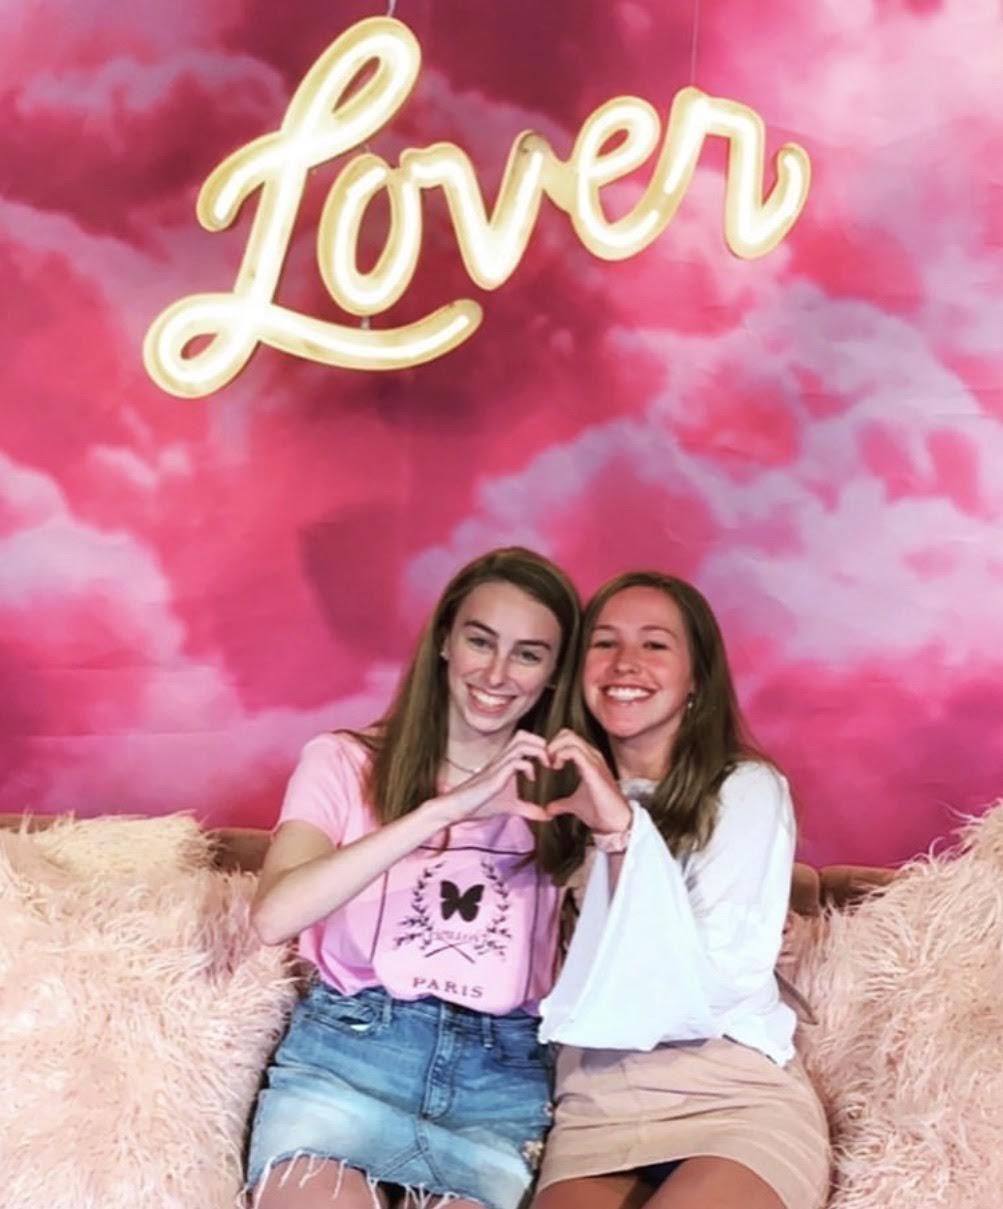 Condolon and her friend create a heart with their hands under the "Lover" sign in Taylor Swift&squot;s New York City, New York, pop-up shop in August 2019. She said she is a big fan of Swift and hopes to meet her one day.